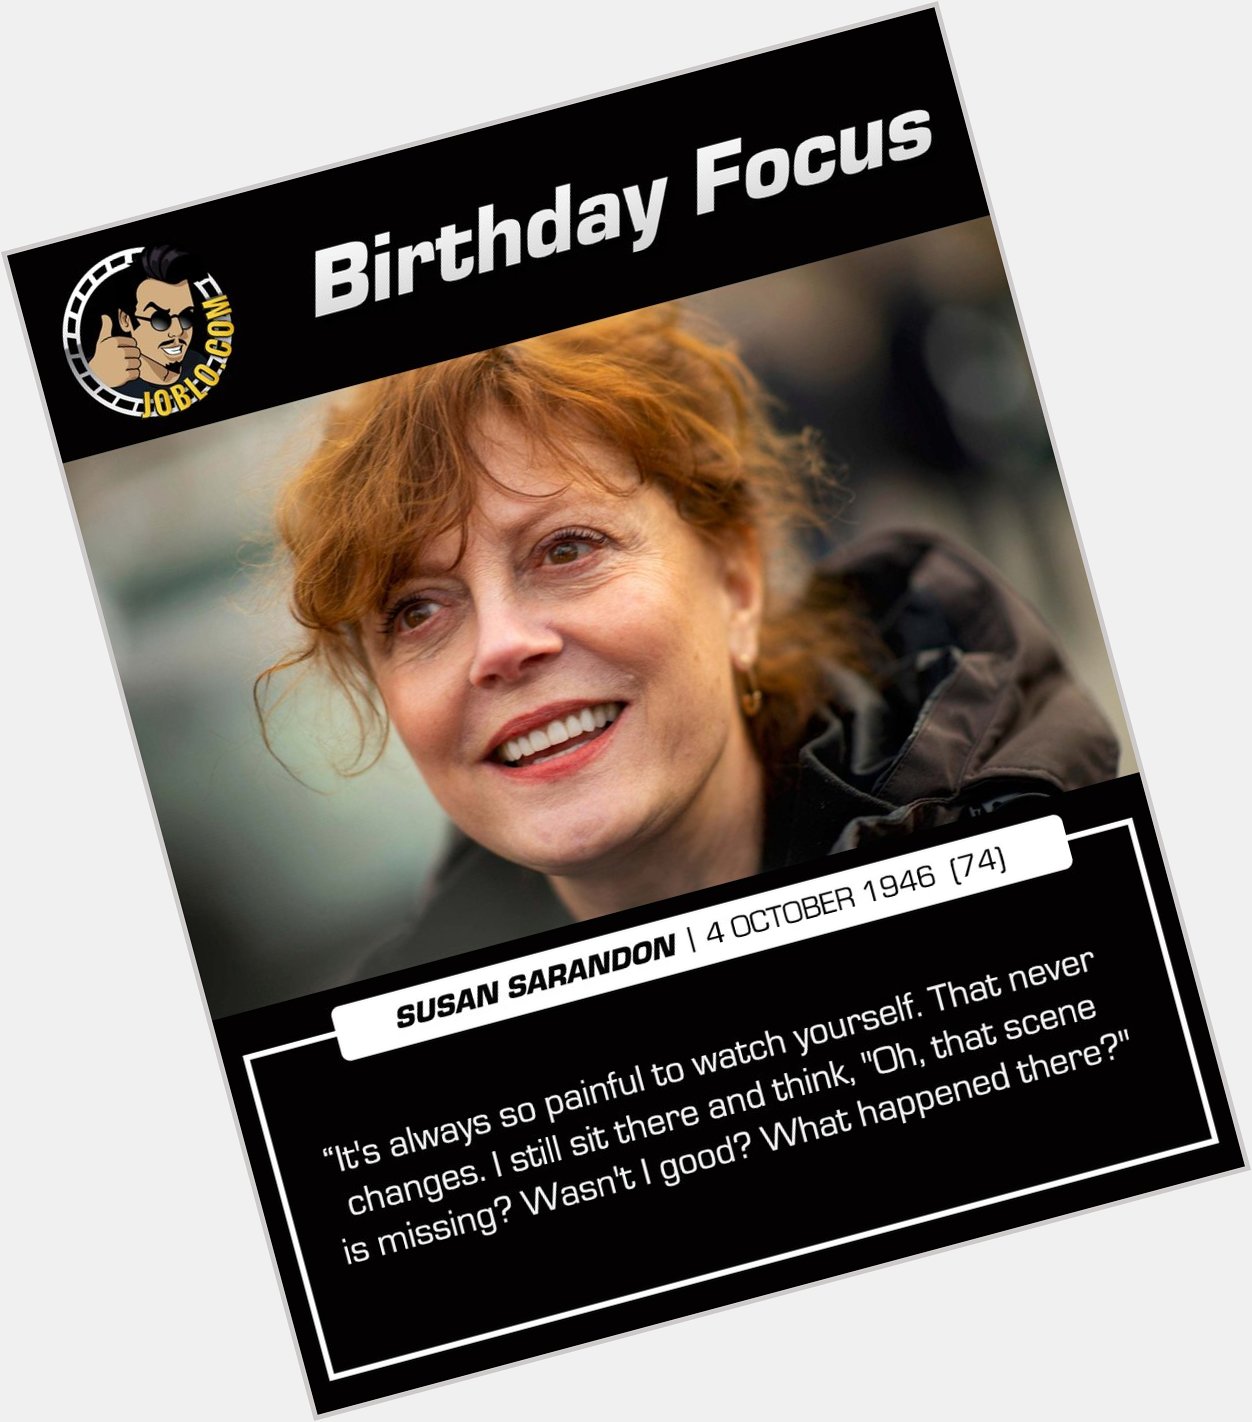 Happy 74th birthday to Susan Sarandon!

What is your favorite performance of hers? 